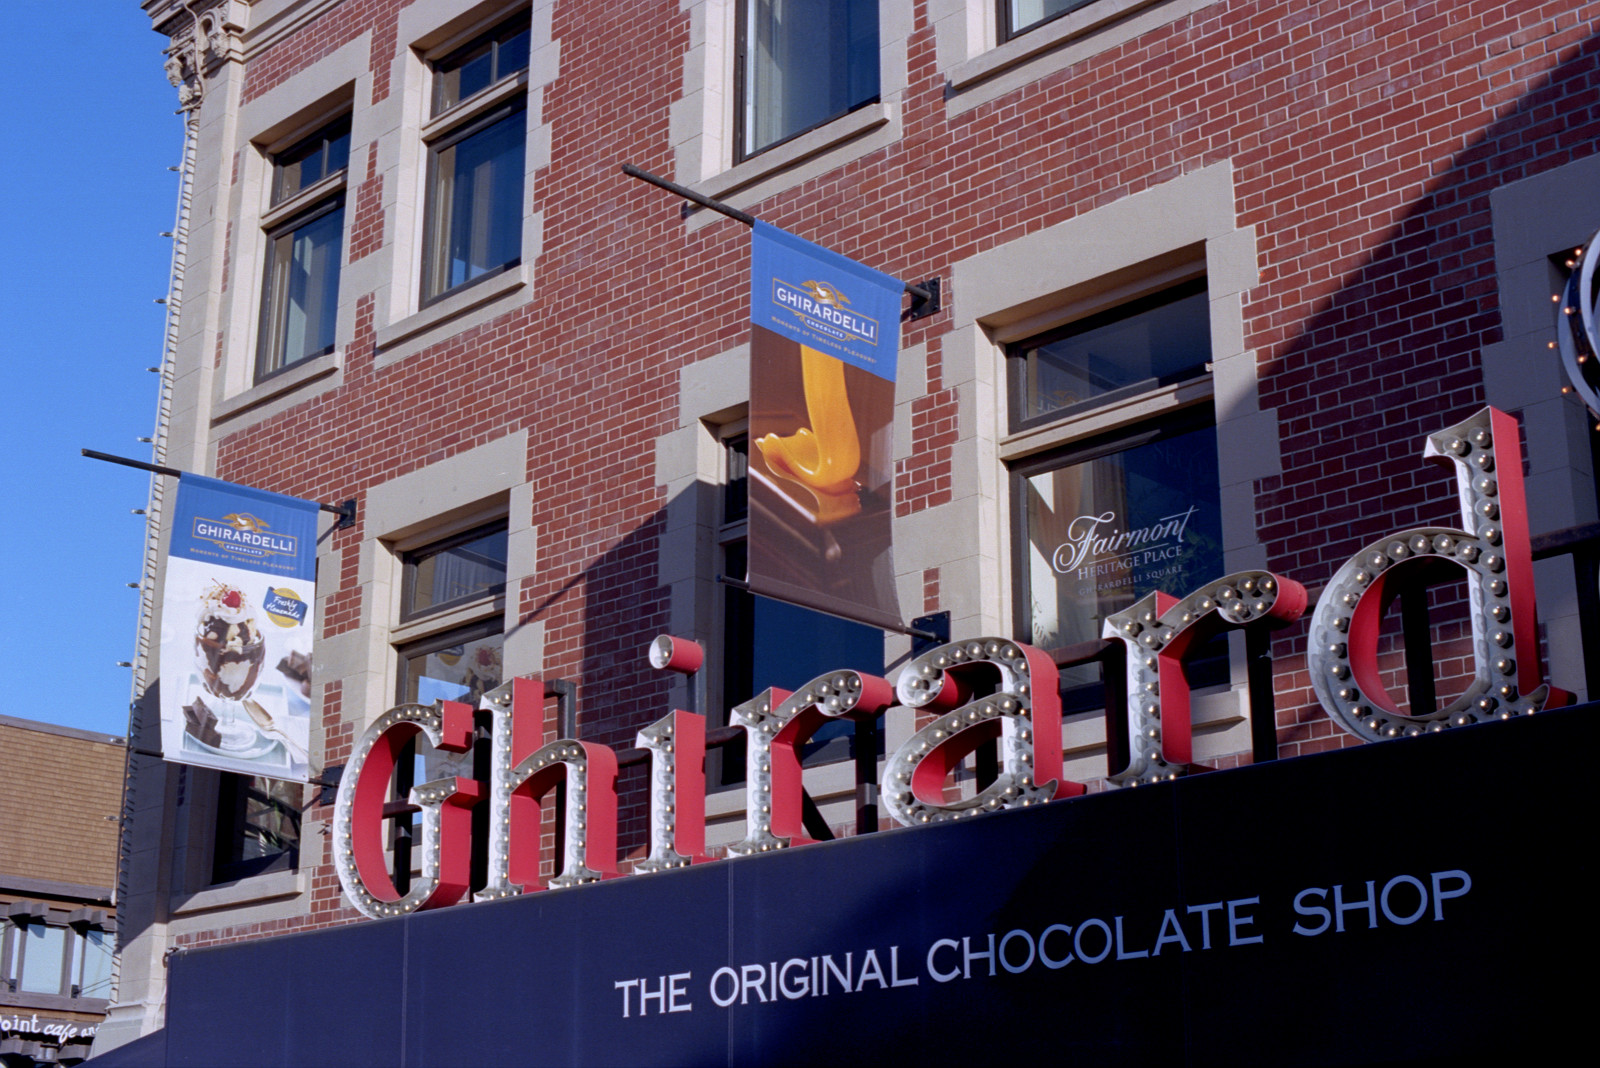 The large red Original Chocolate Shop sign stands above the Chocolate Cafe at Ghirardelli Square. Ghirardelli banners are placed above the marquee, and the background for all is the red brick facade of the building.